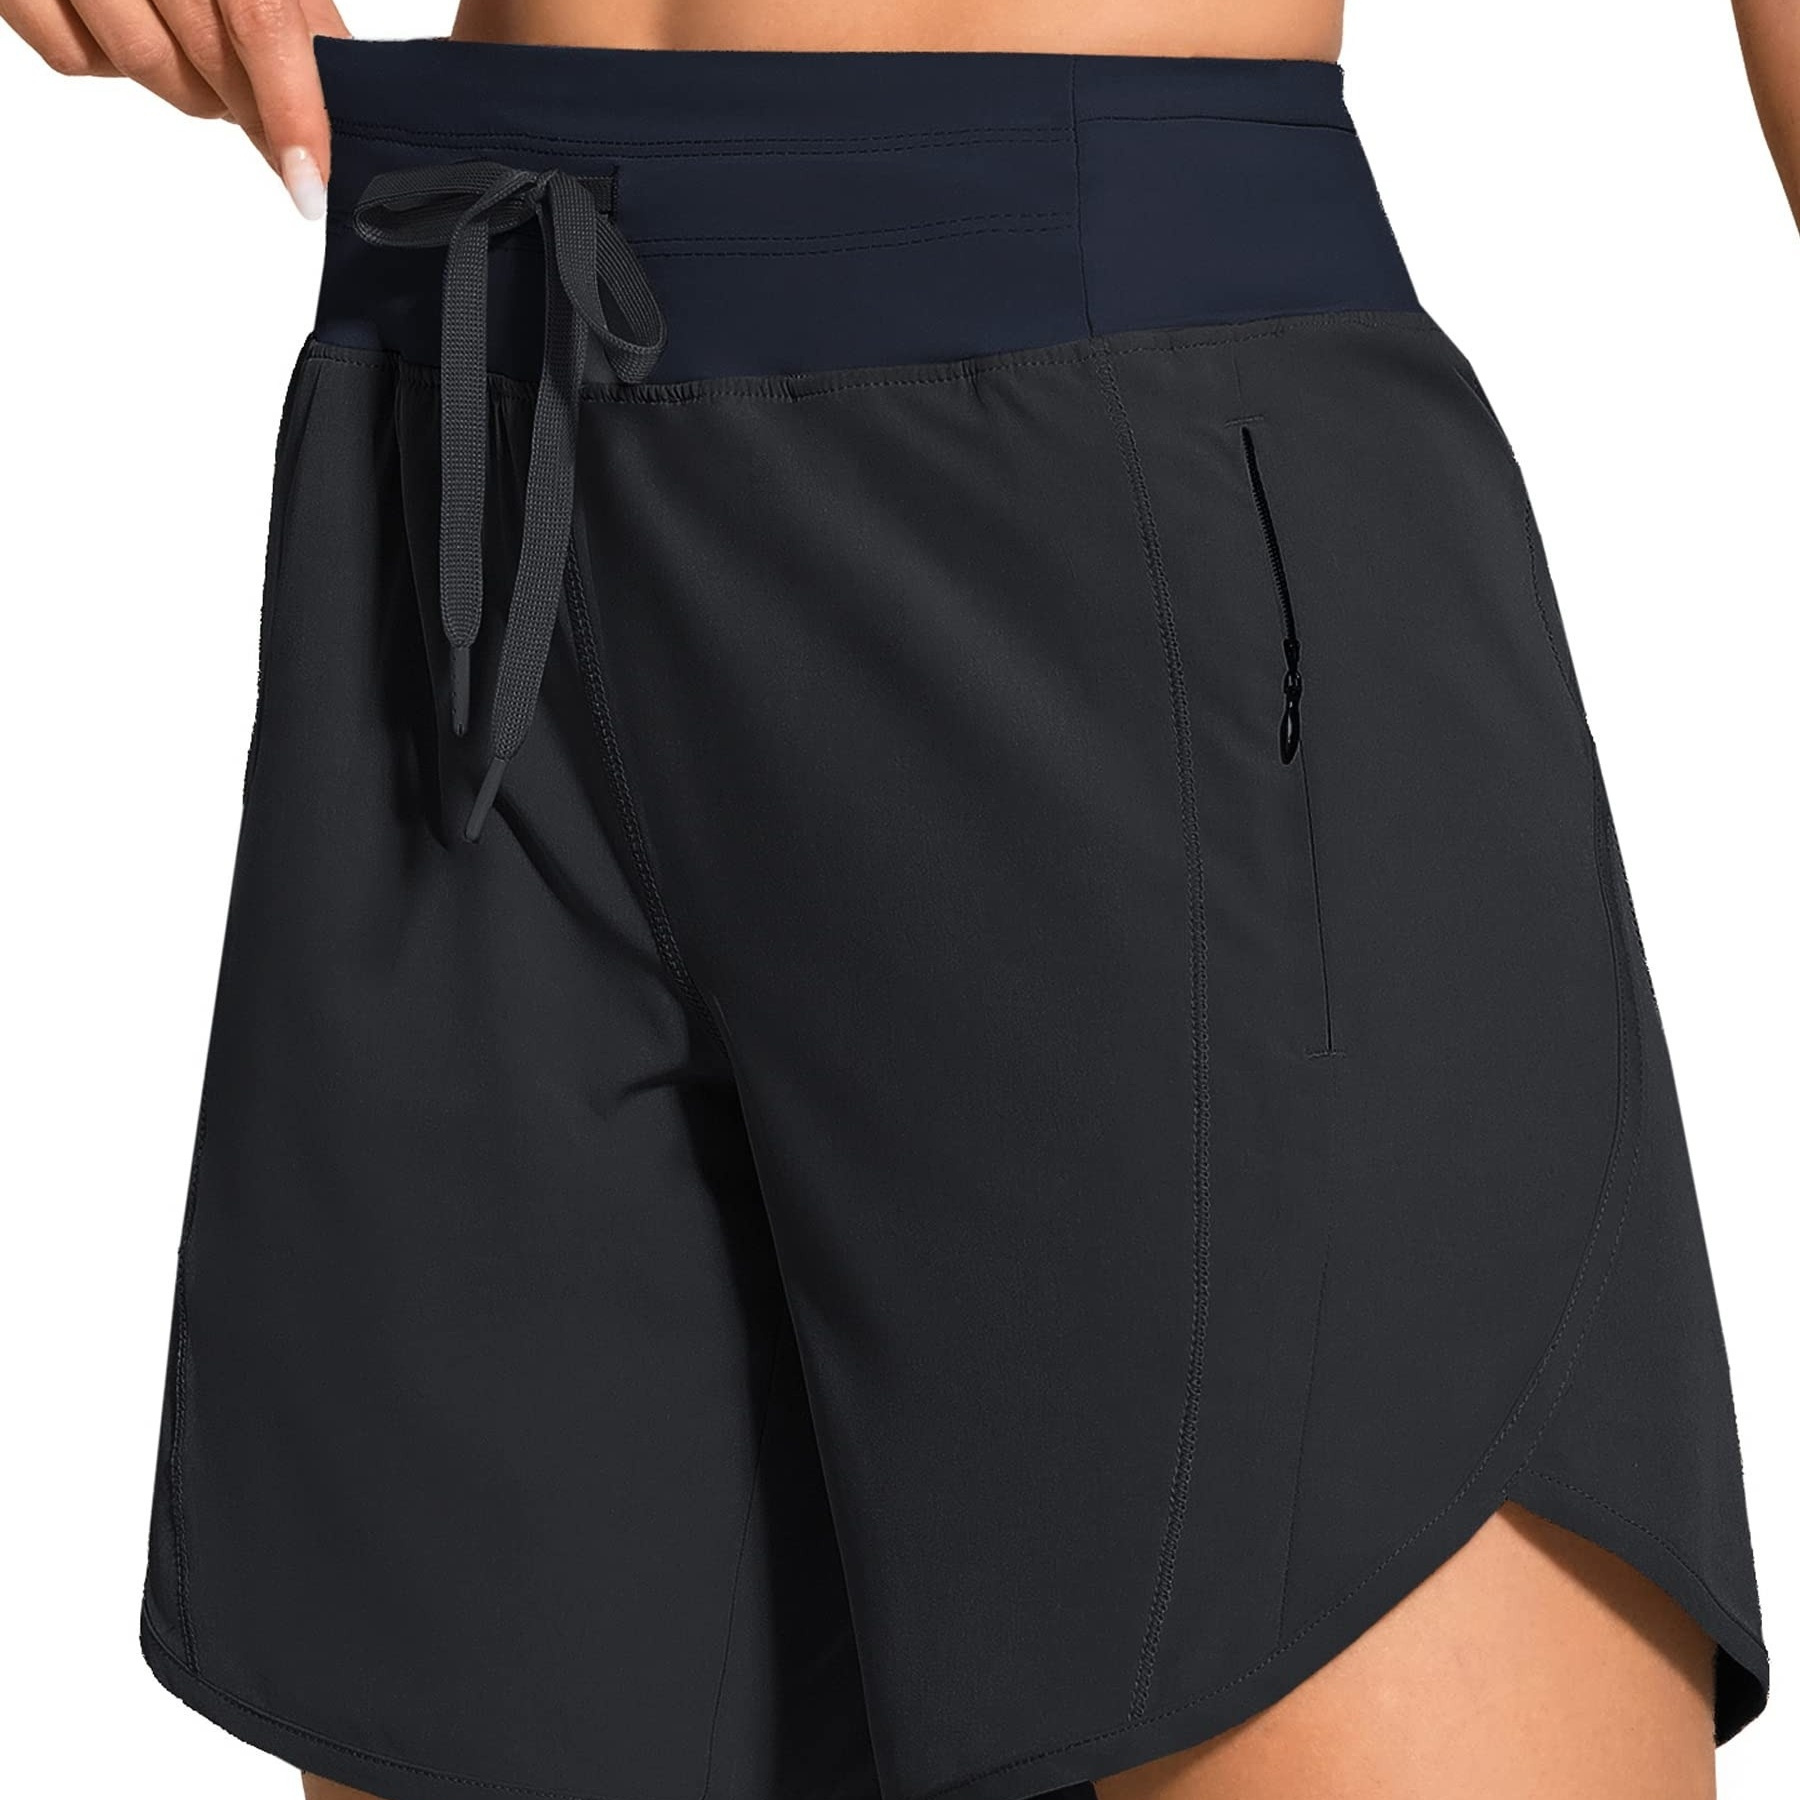 

Women's High-waisted Running Shorts, Casual Athletic Shorts, With Pockets & Drawstring